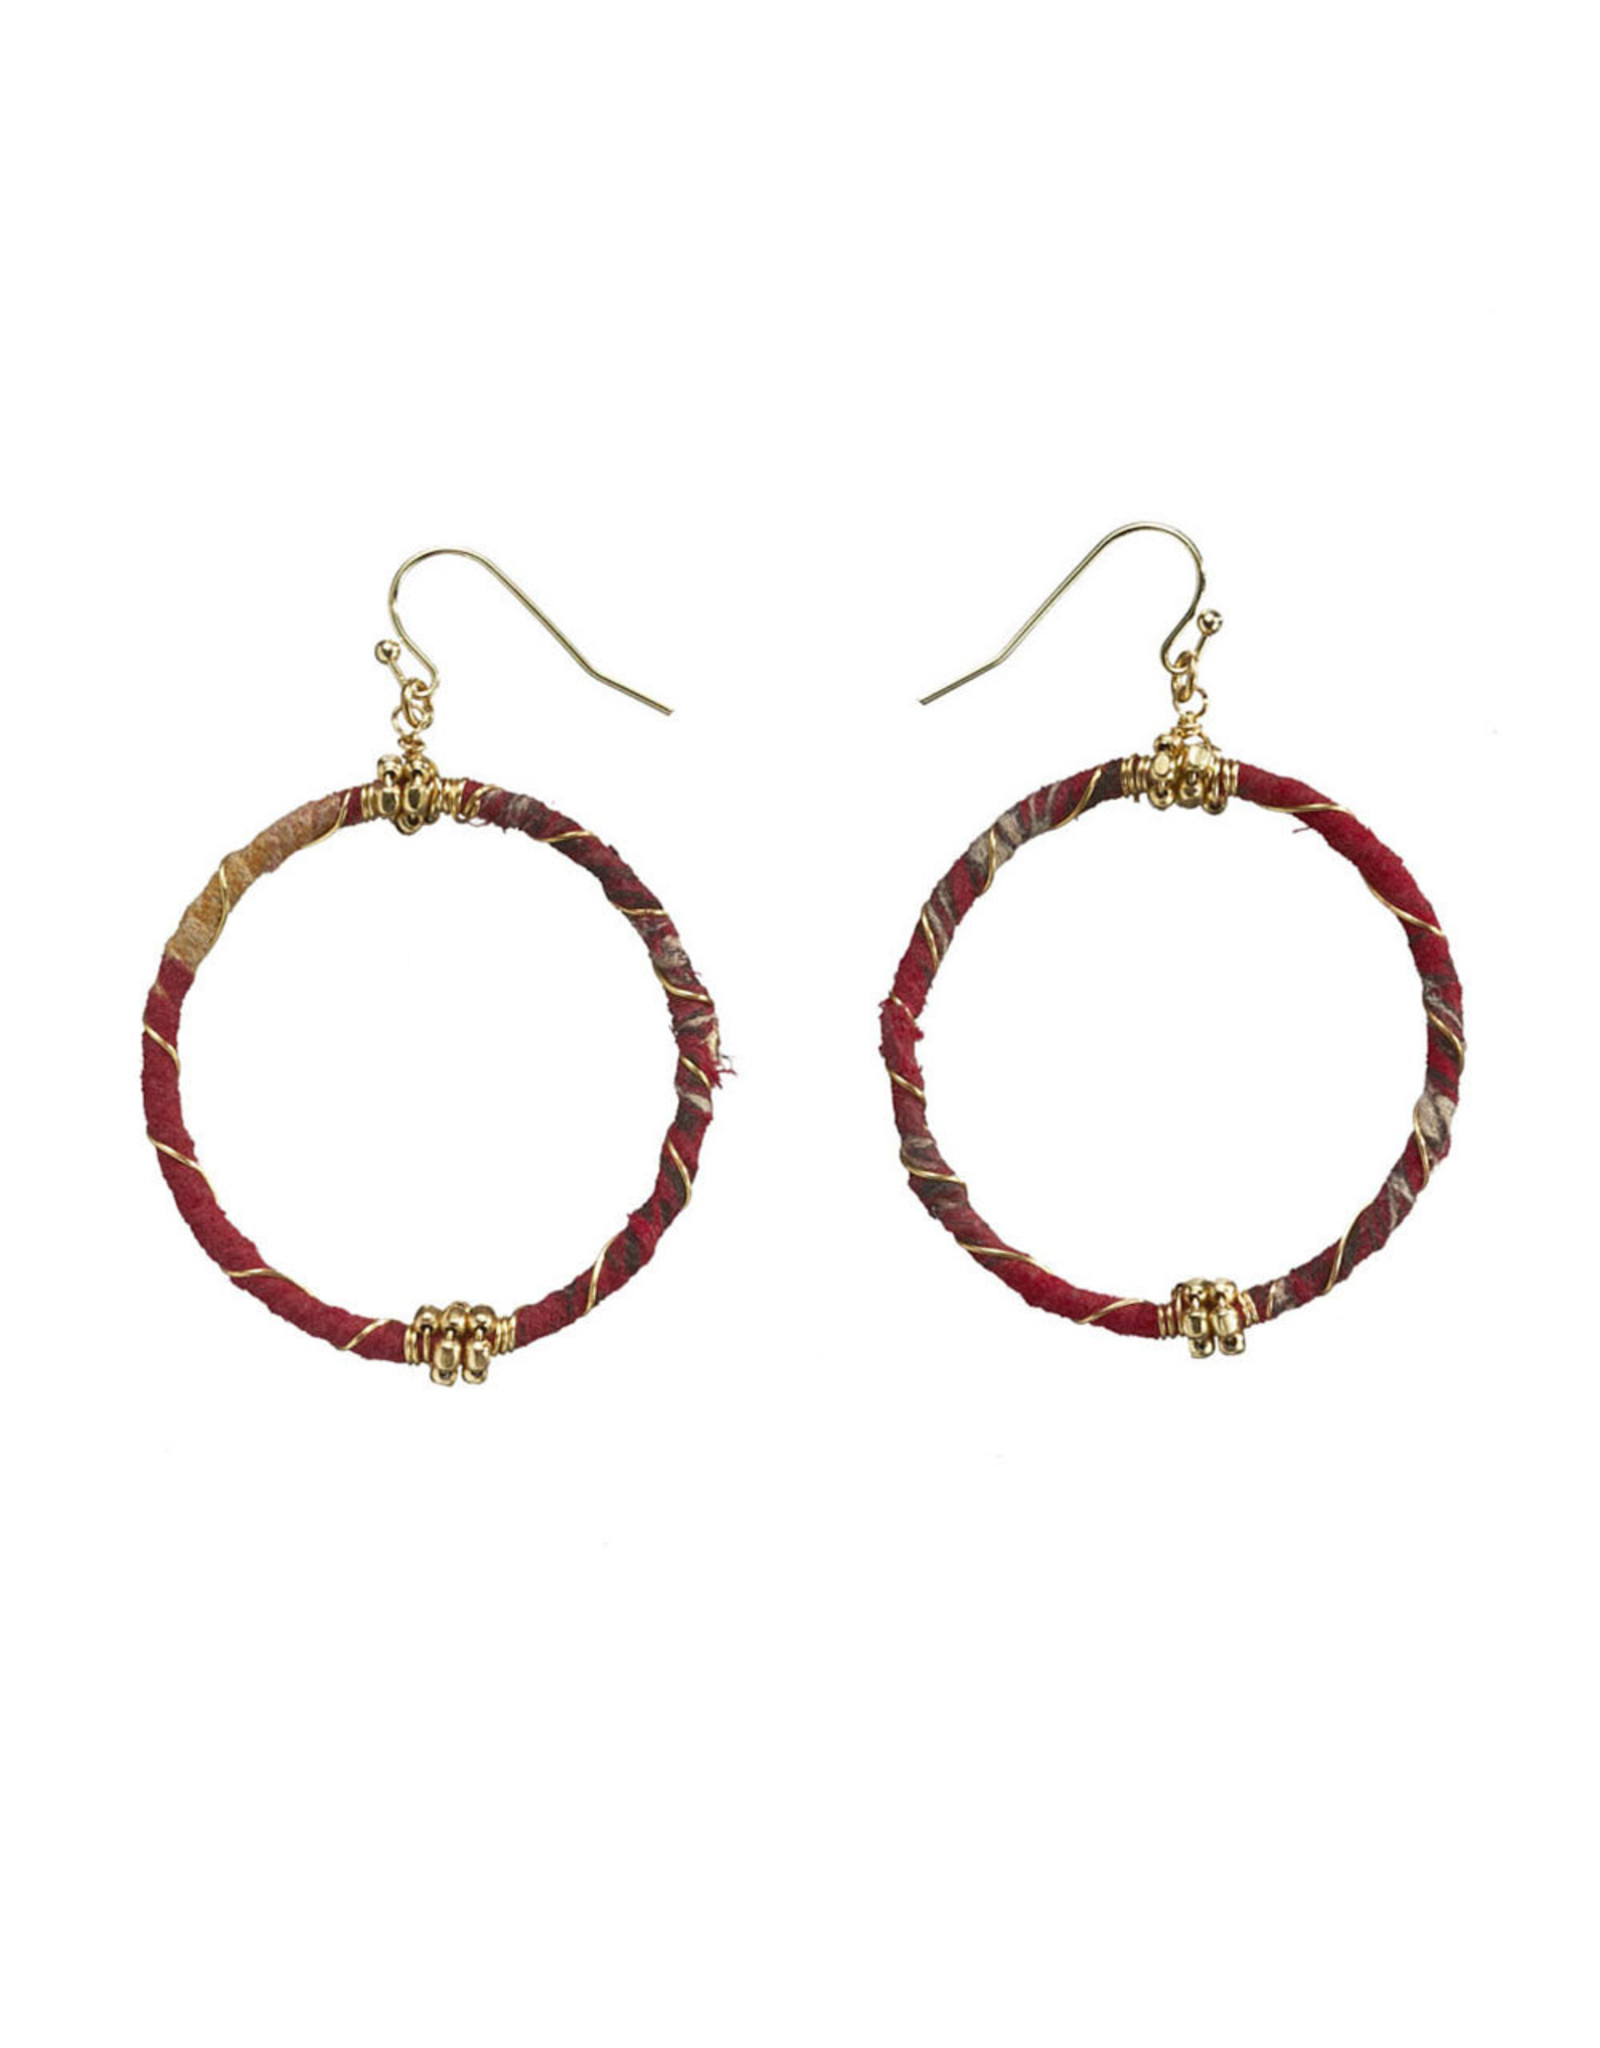 Recycled Sari Wire Wrap Earrings, India